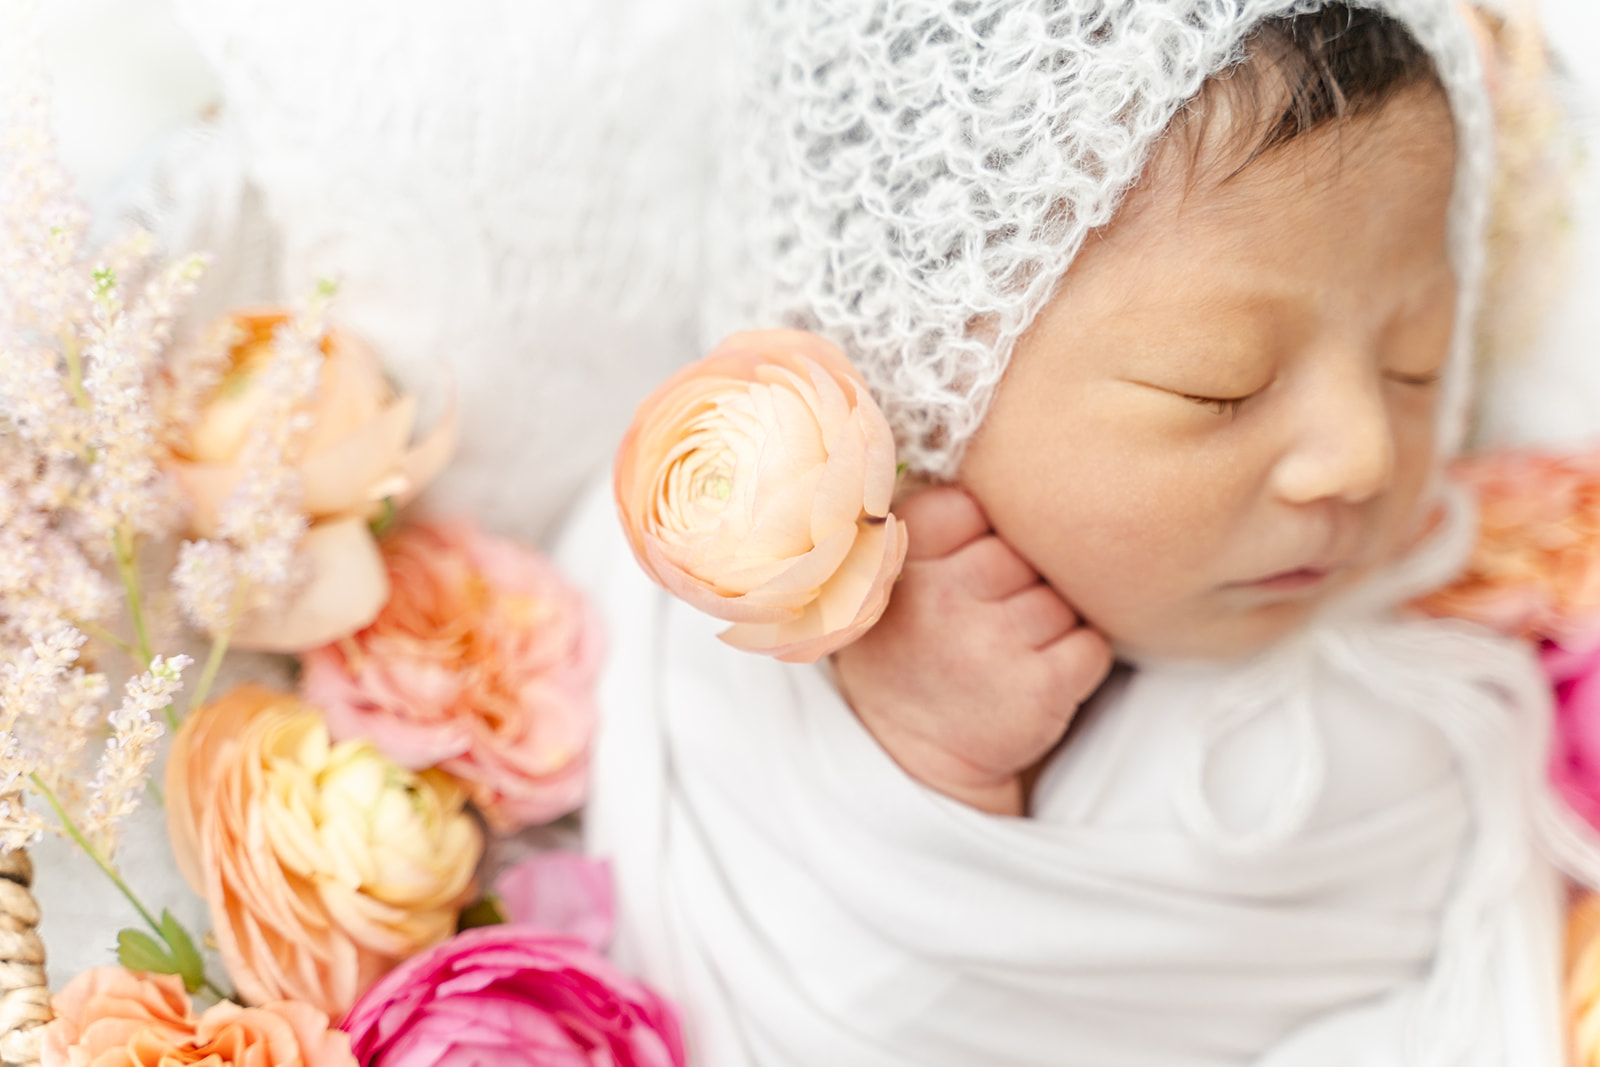 A newborn baby sleeps in a basket and knit bonnet while holding a pink flower thanks to Orange County Doulas